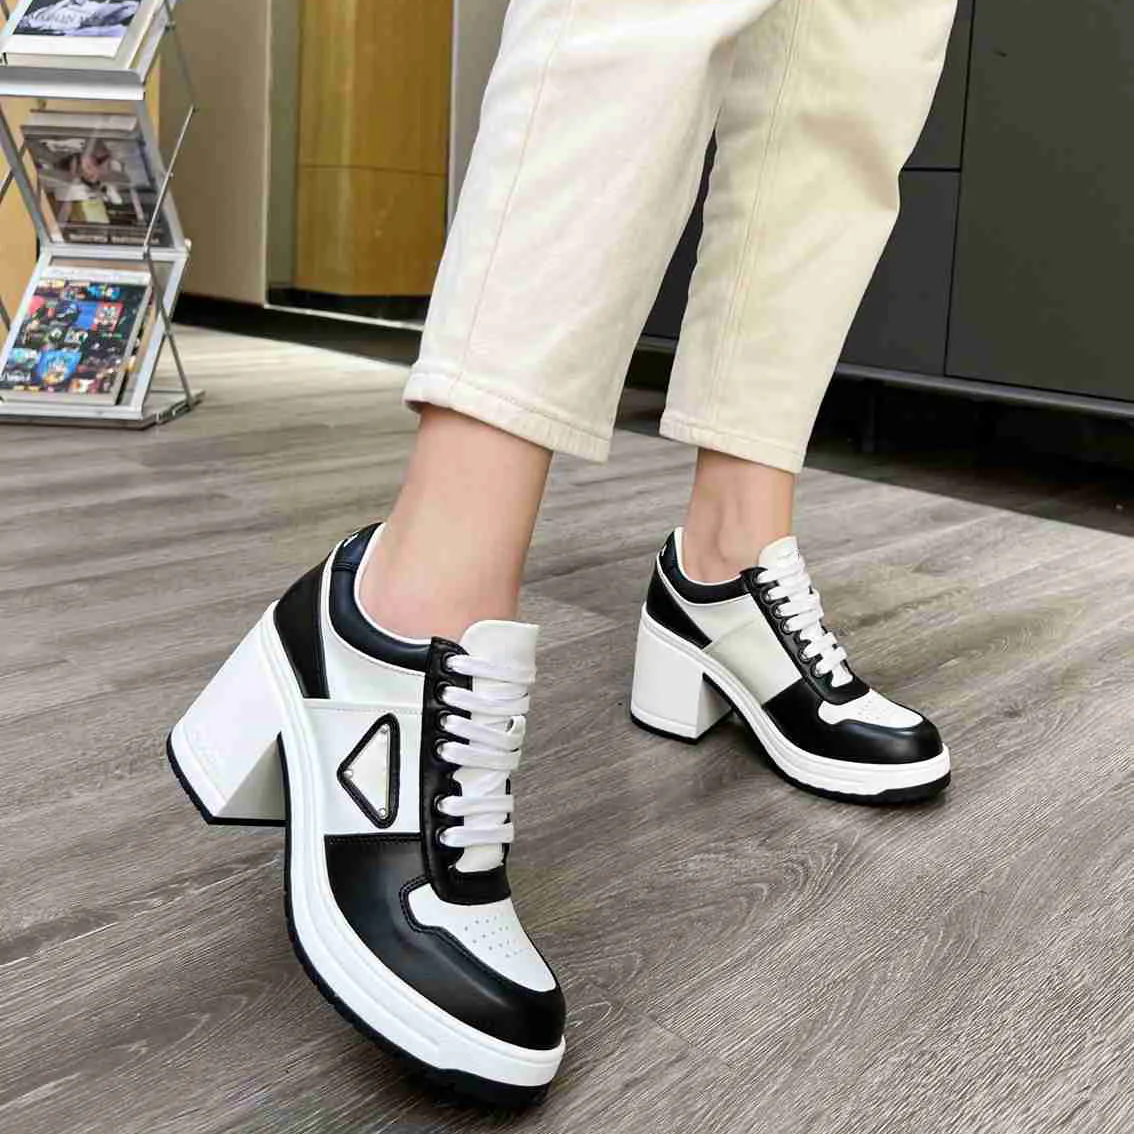 Dicy Comfortable Casual Platform Sneakers Stylish Sneakers Shoes for Women  And Girls Sneakers For Women - Buy Dicy Comfortable Casual Platform Sneakers  Stylish Sneakers Shoes for Women And Girls Sneakers For Women